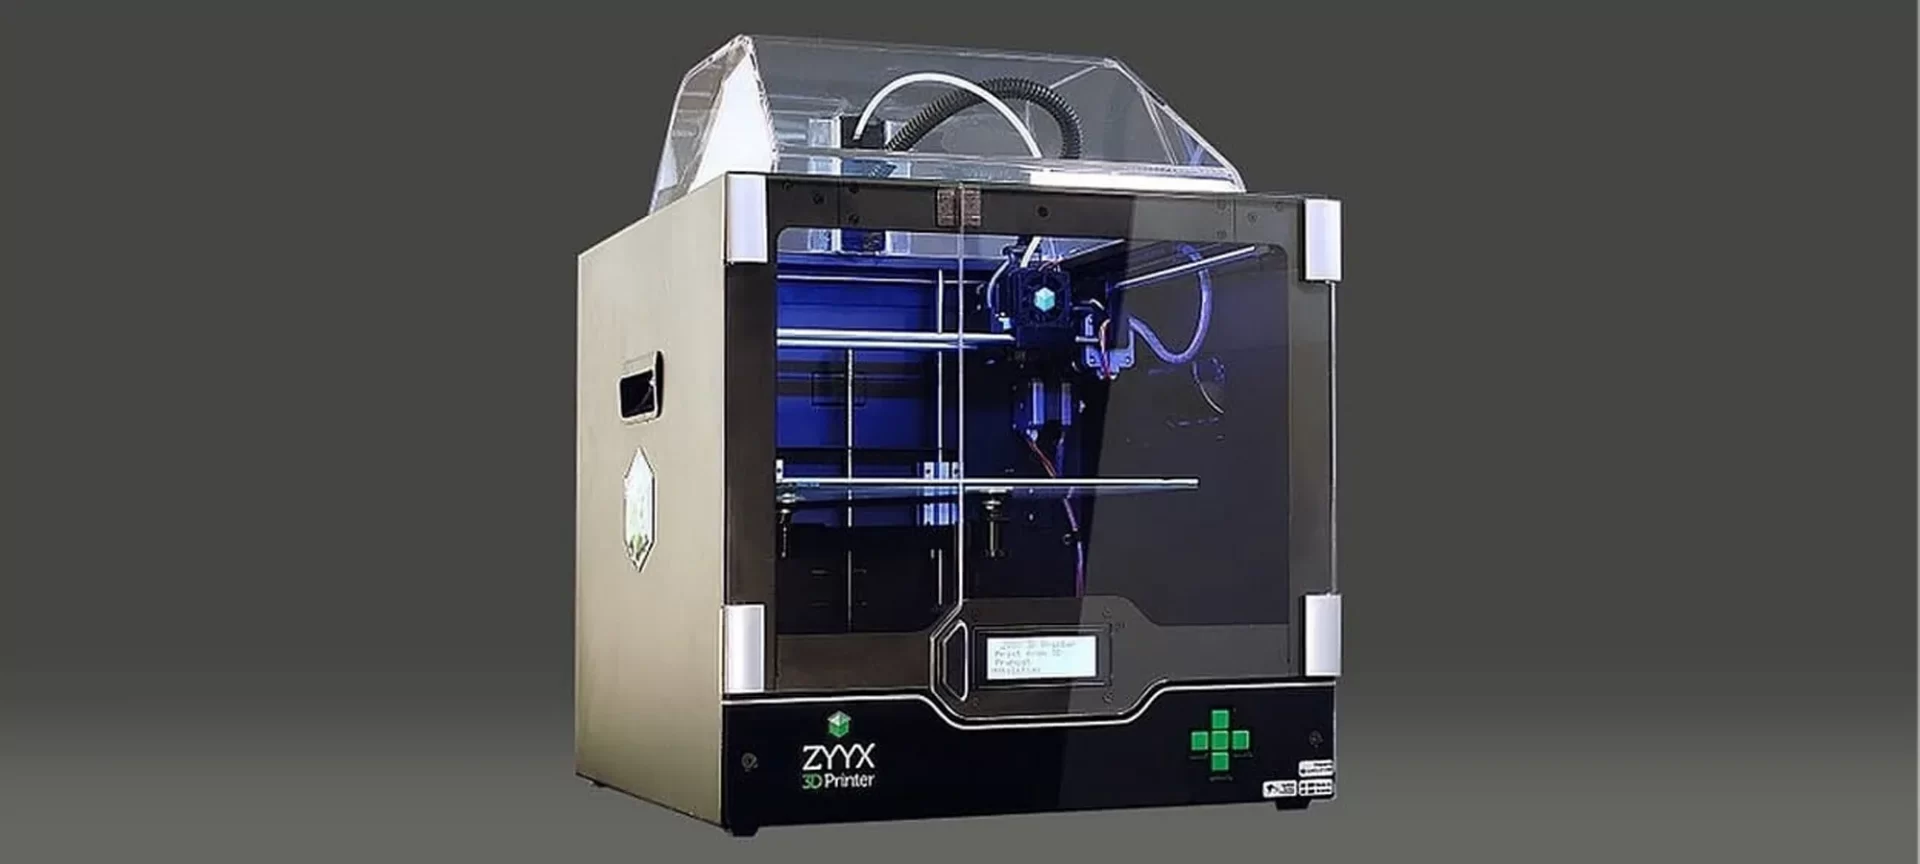 A Brief Review of Printing Bronzefill with ZYYX 3D Printer